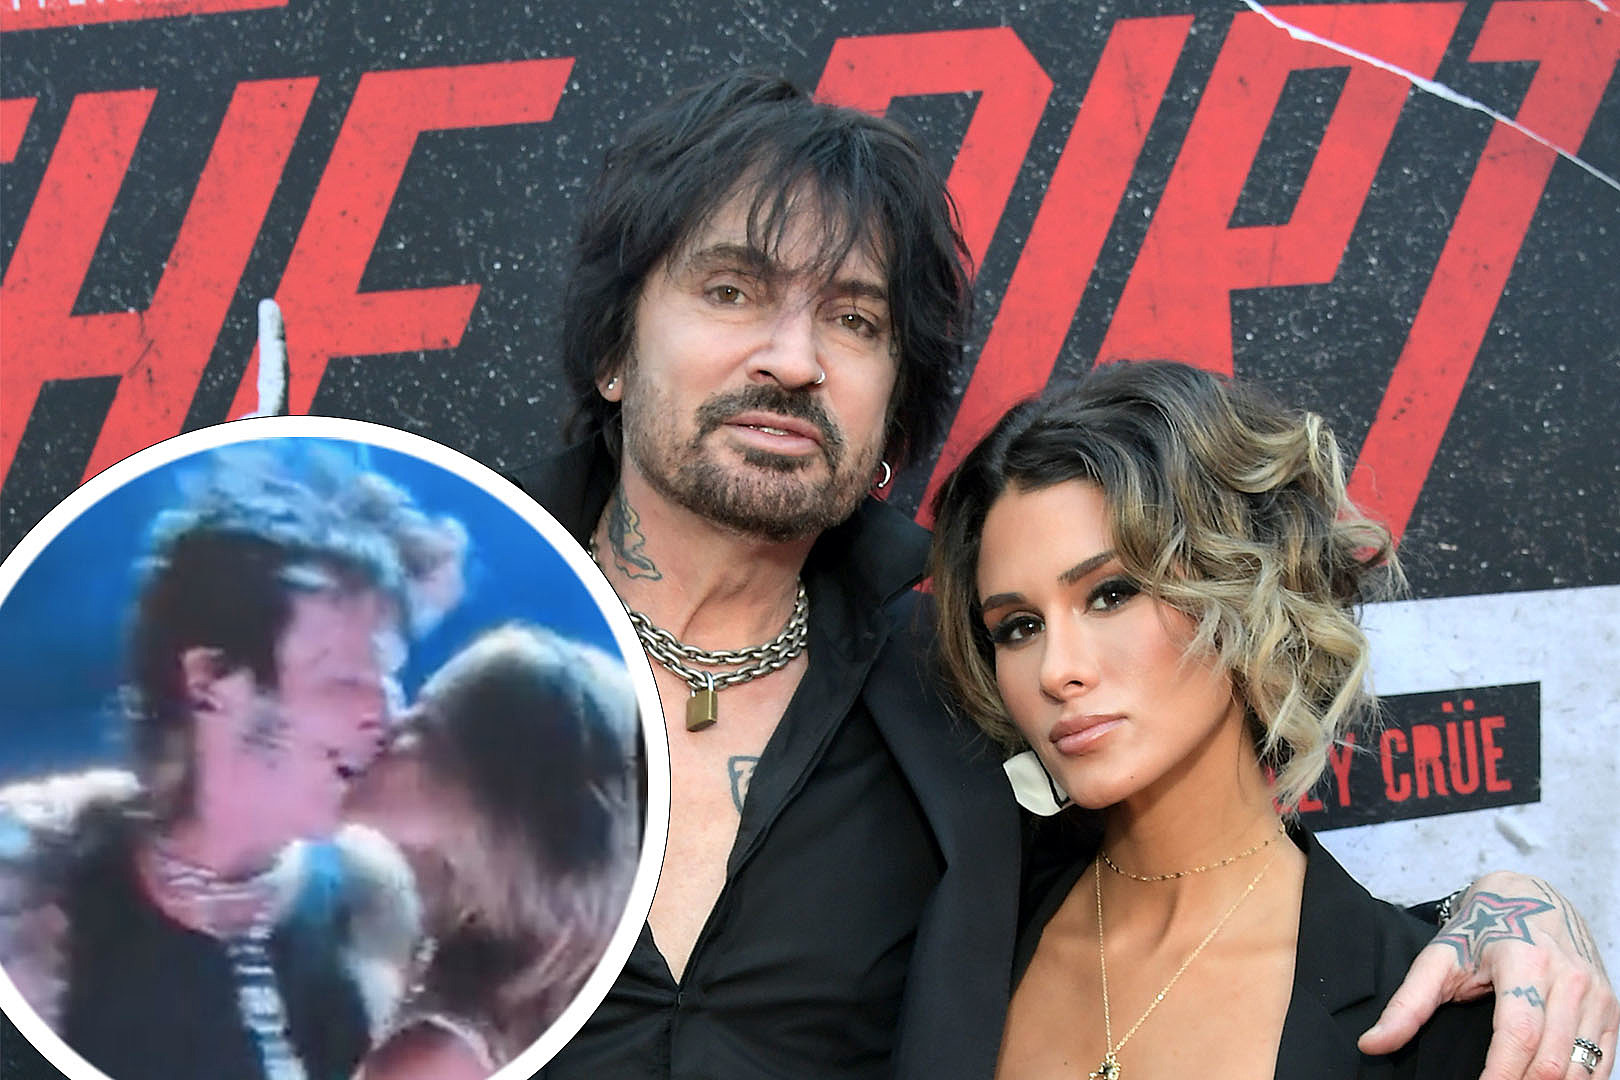 Tommy Lee Brings Wife Brittany Furlan Onstage to Flash Crowd image image